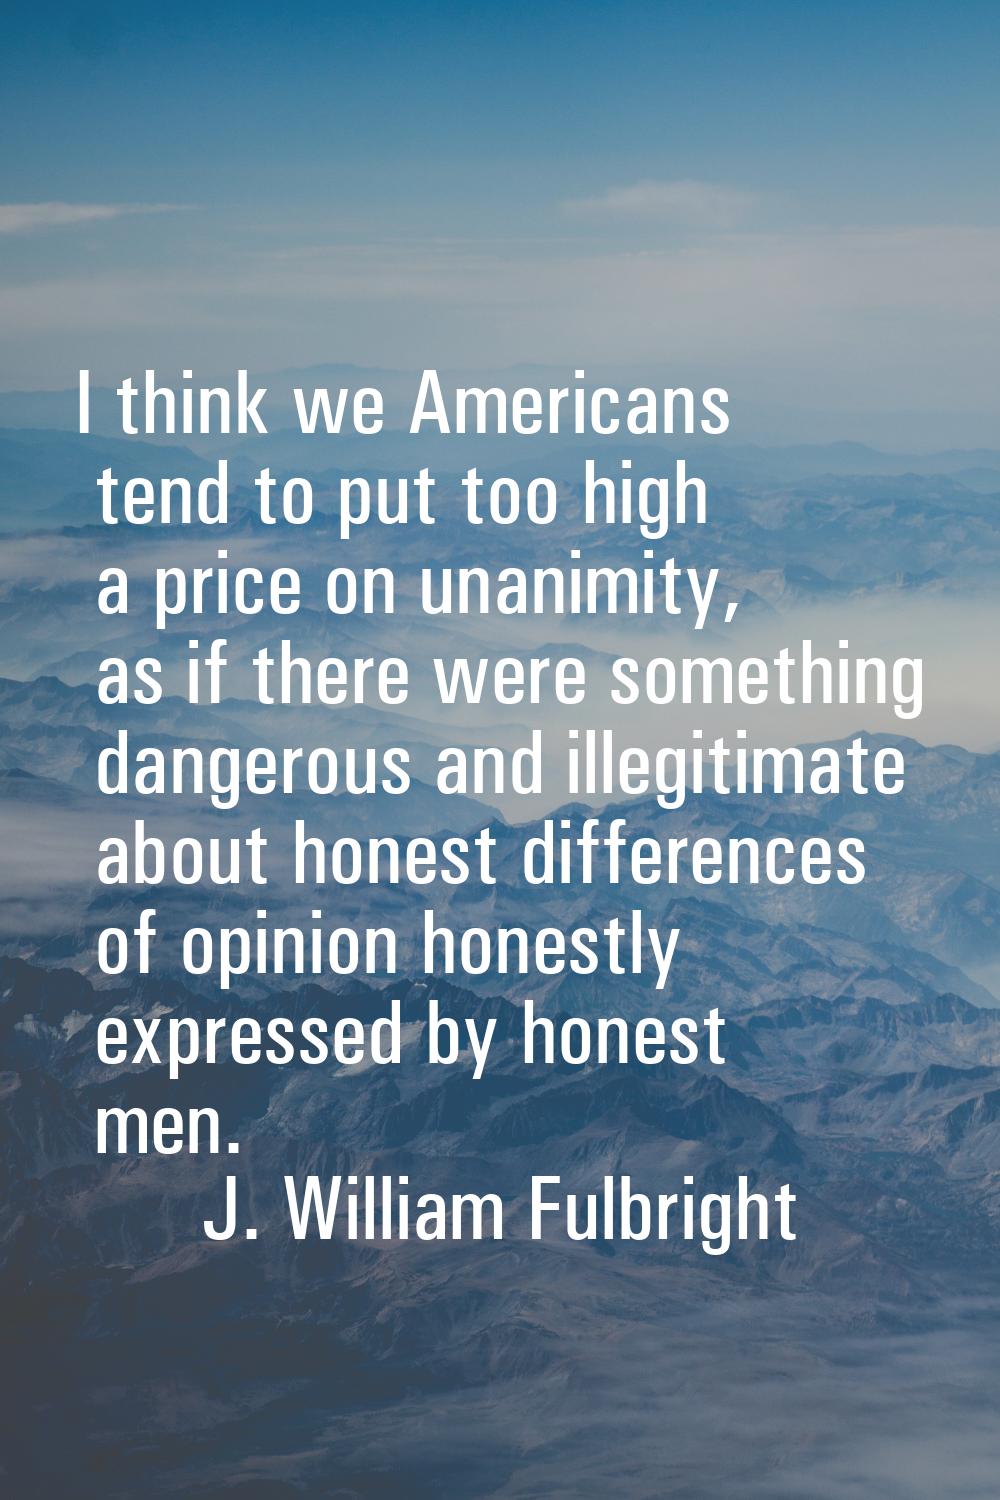 I think we Americans tend to put too high a price on unanimity, as if there were something dangerou